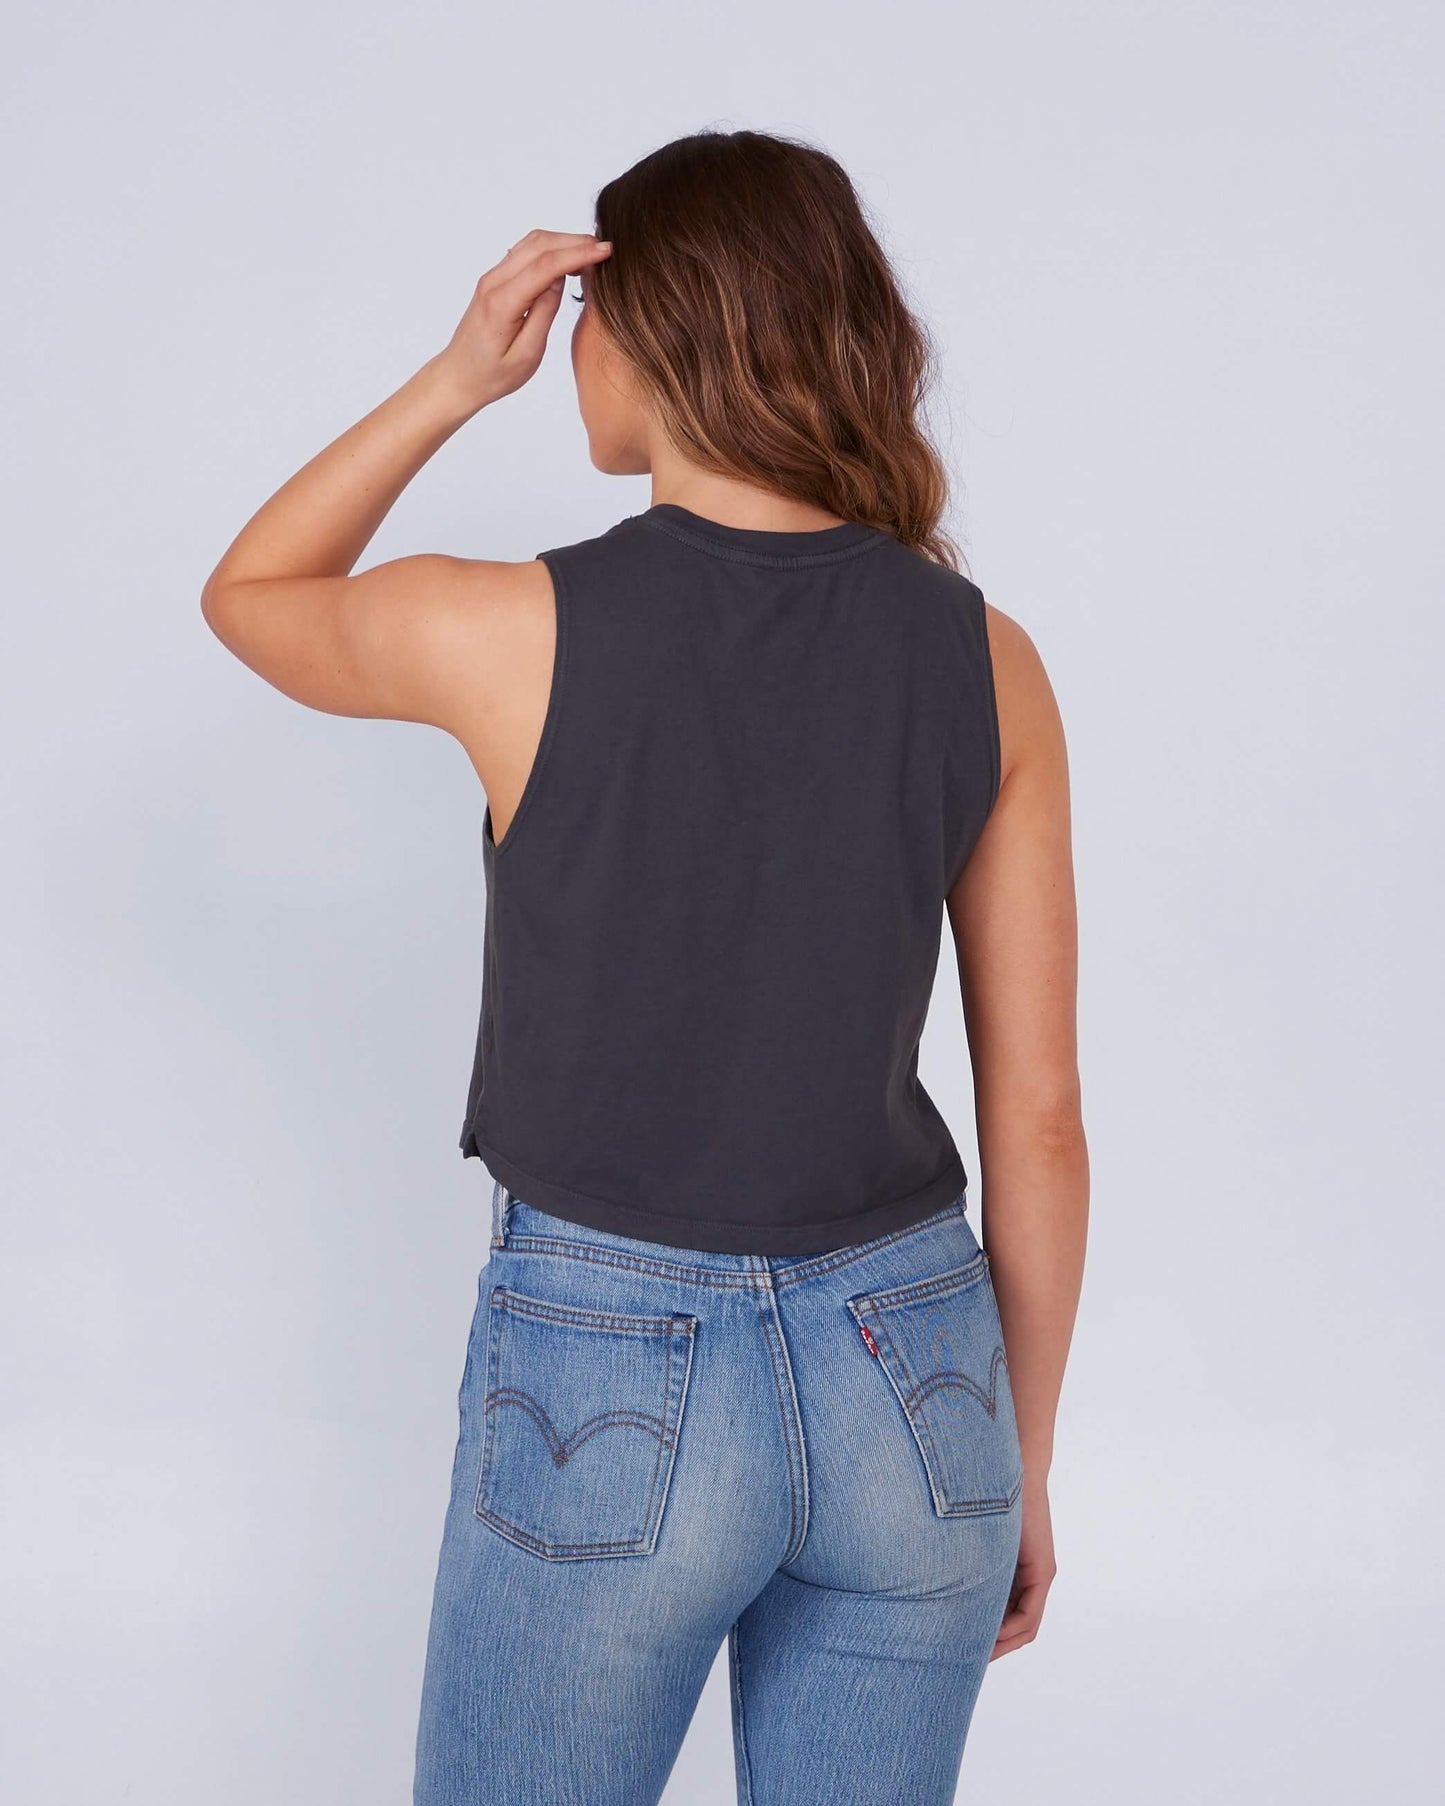 Salty Crew Mujer - Jackpot Cropped Tank - Charcoal